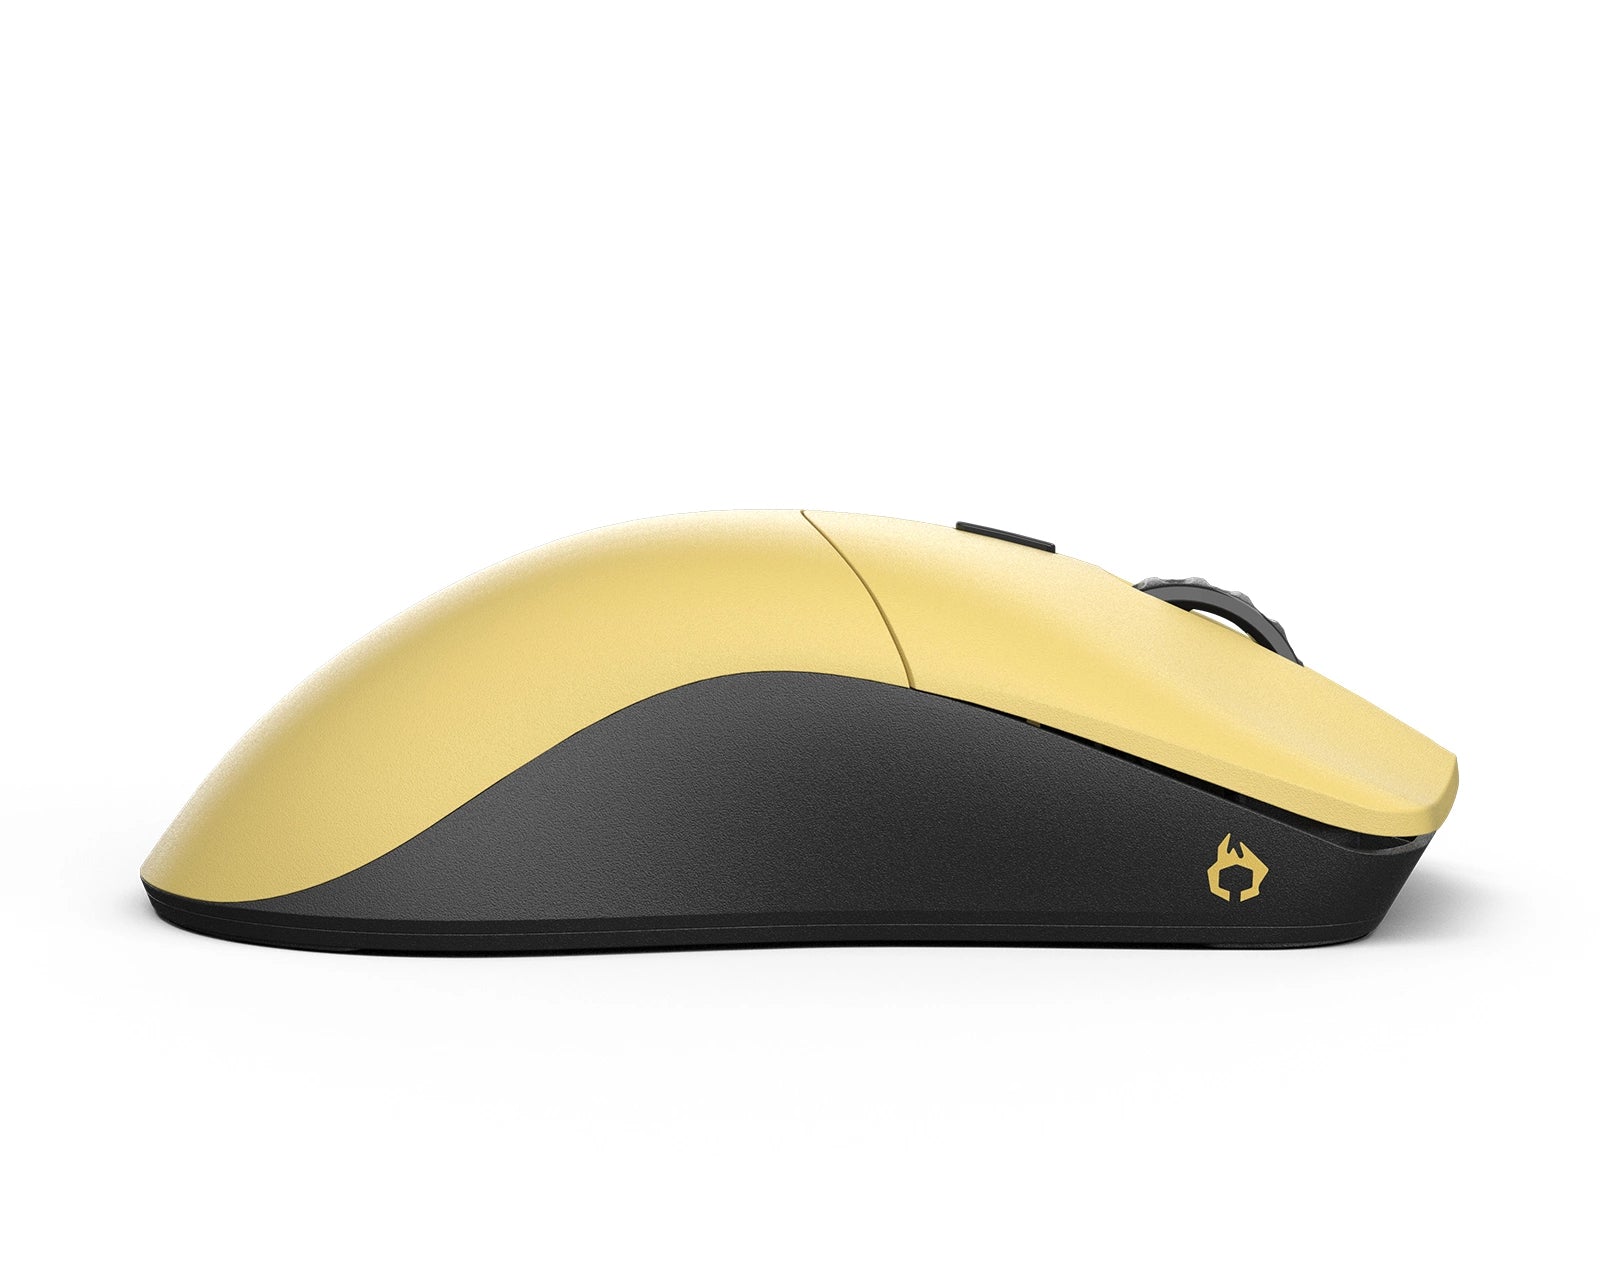 Glorious Model O PRO Wireless Mouse - Golden Panda - Forge